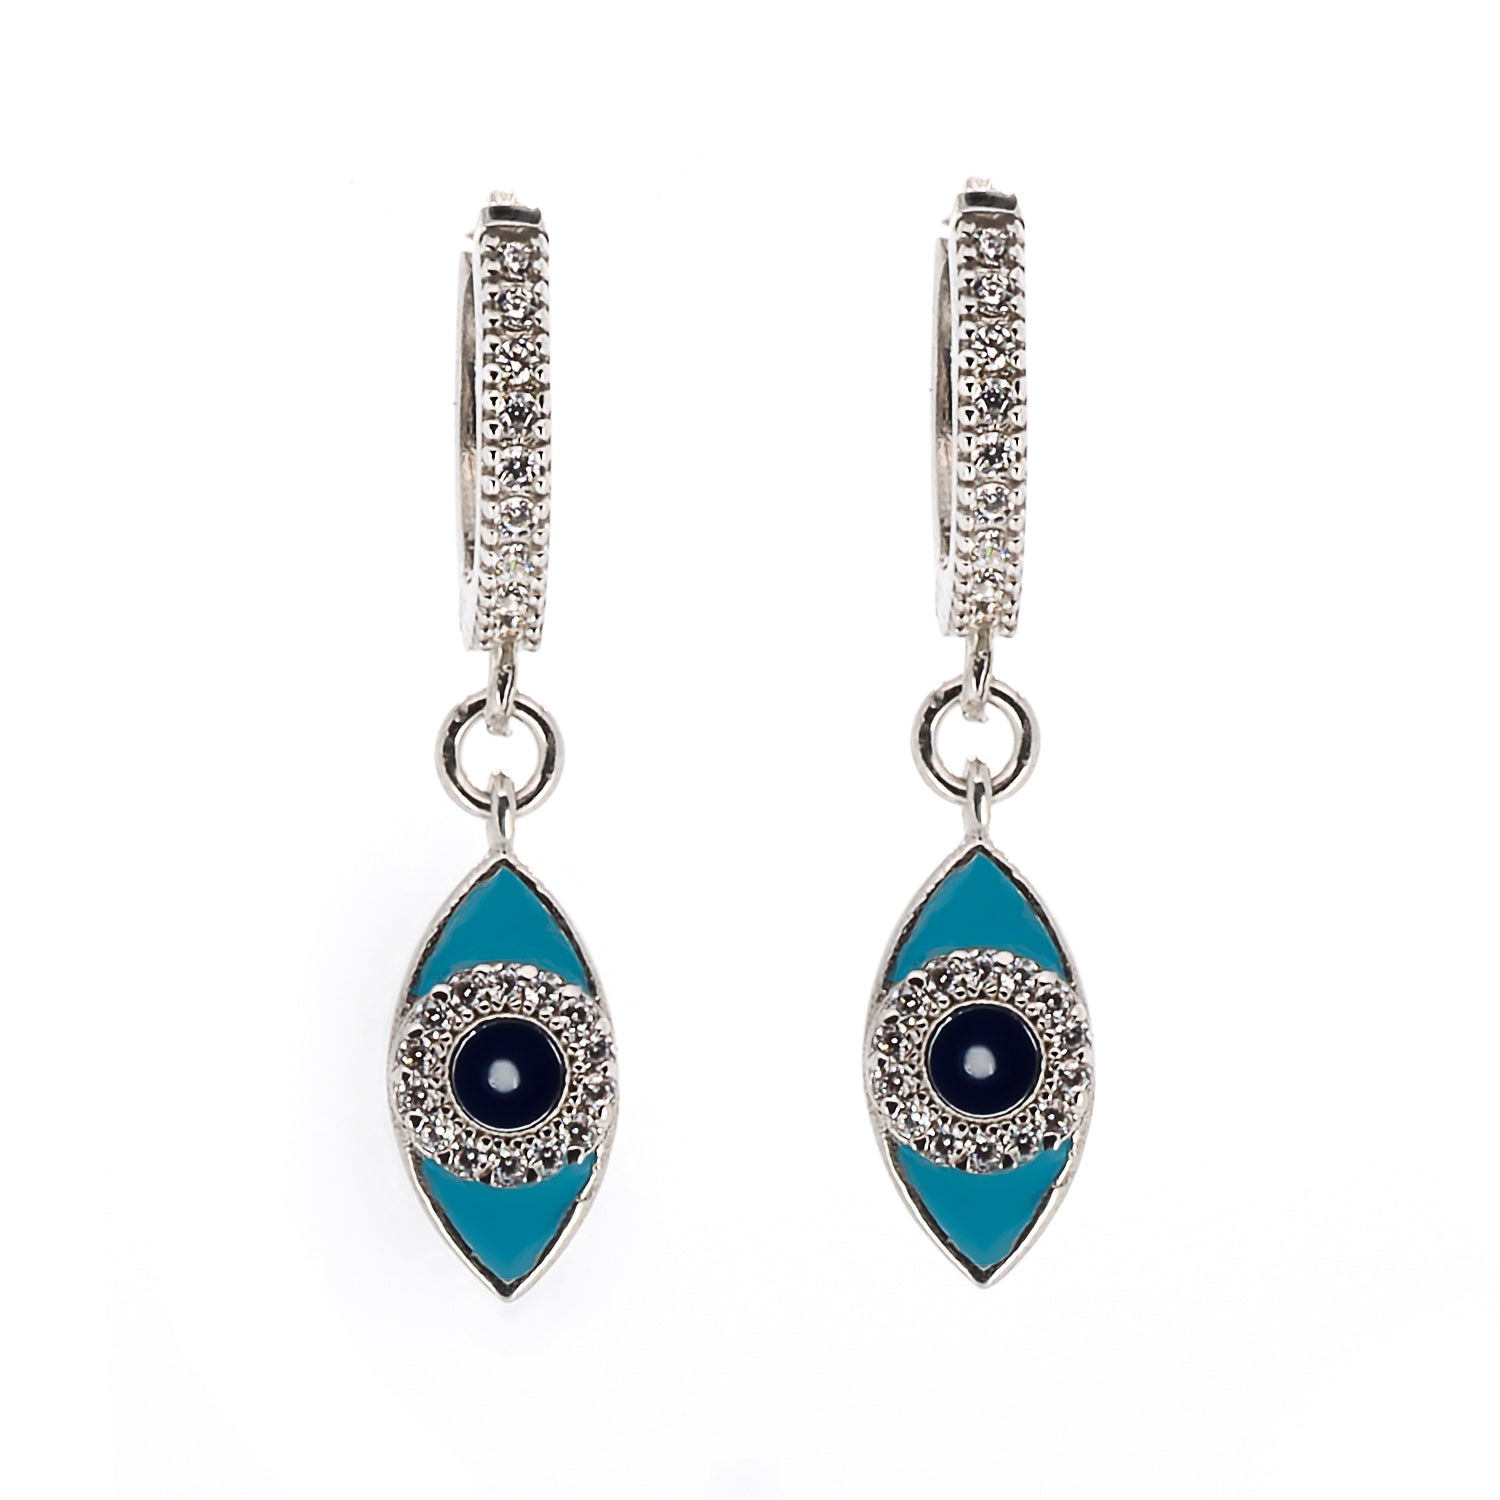 Turquoise Sparkly Silver Evil Eye Earrings - A captivating blend of spirituality and elegance